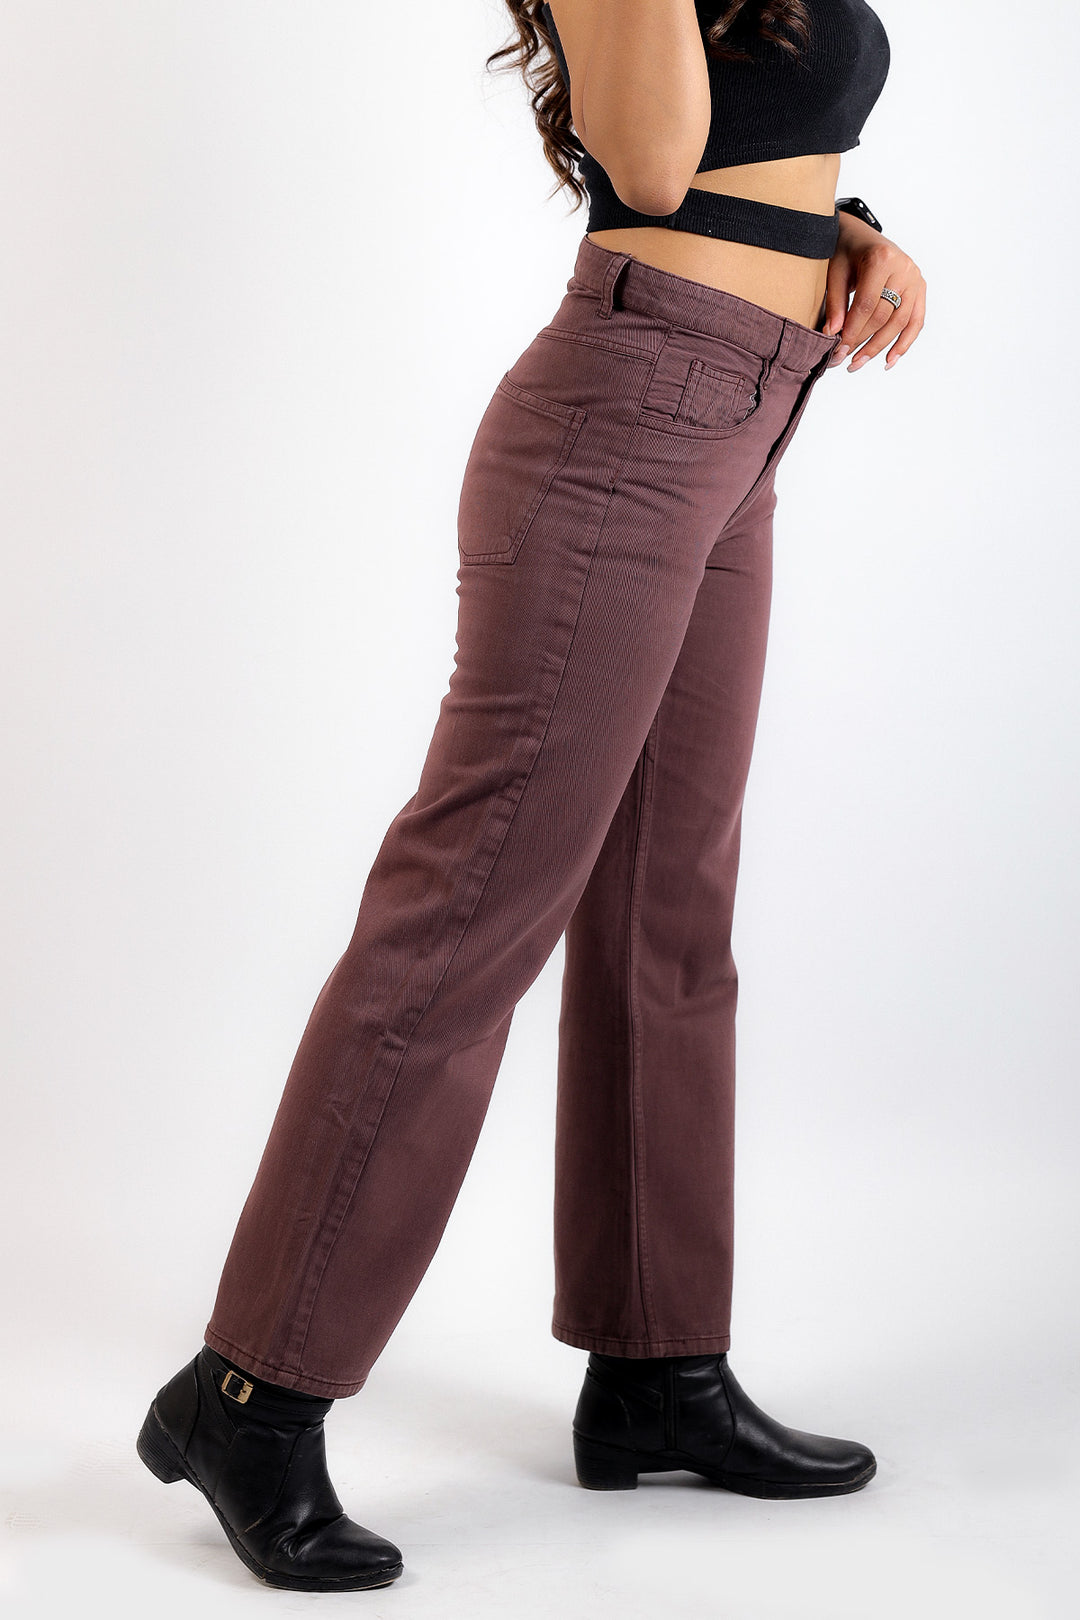 Casual Brown Jeans for Ladies